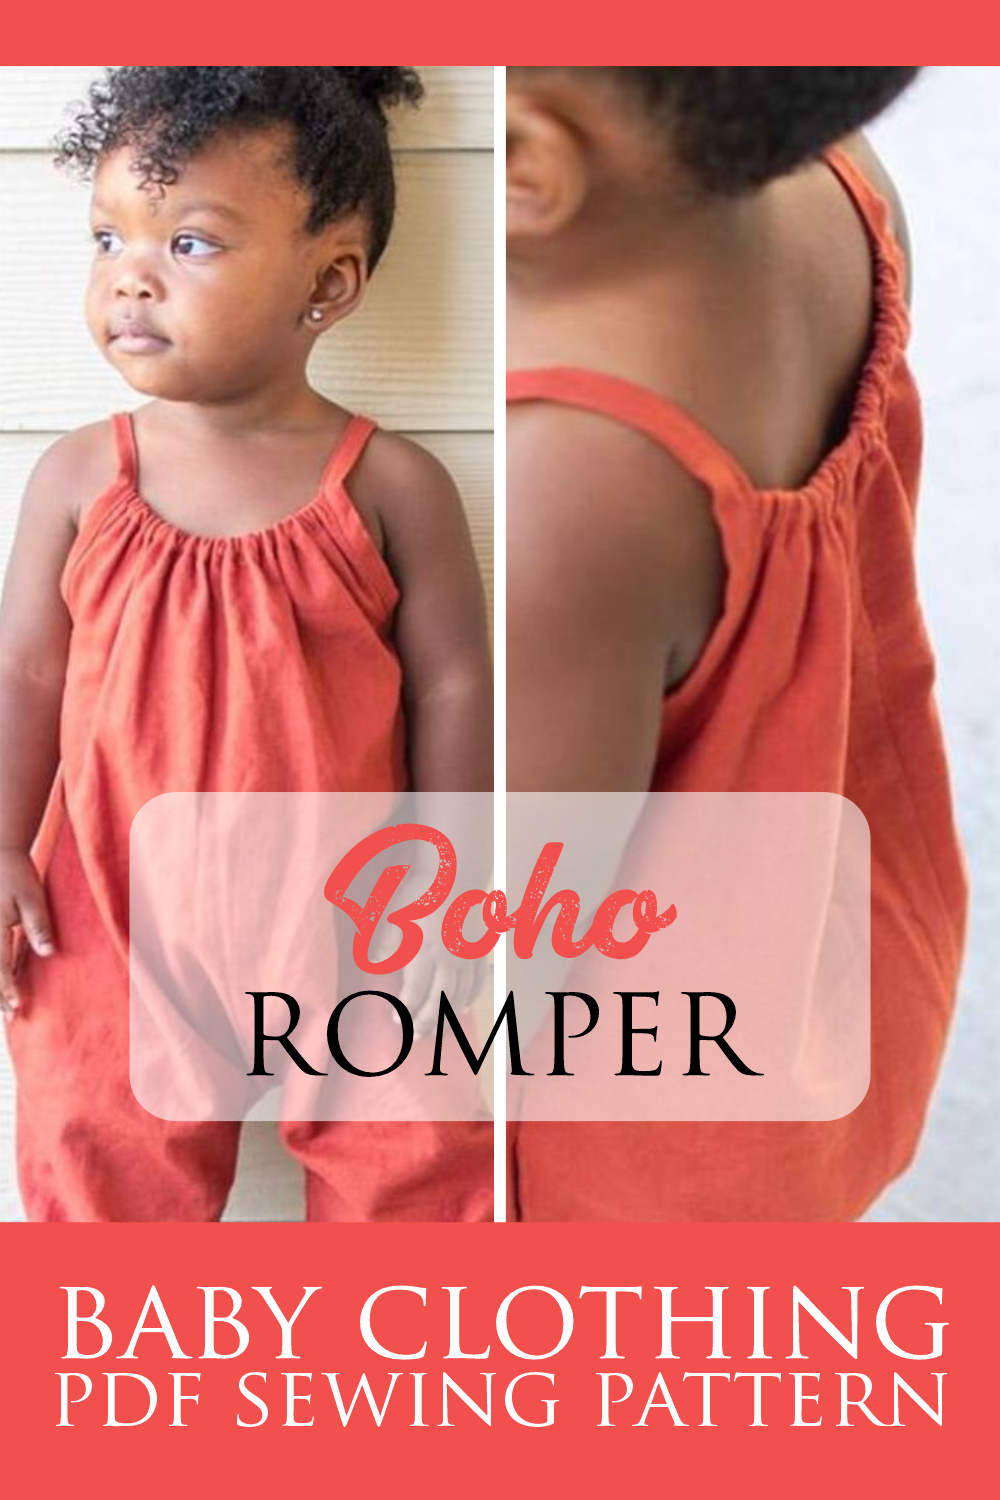 PDF Pattern - Boho Romper - Babies/Toddlers - Premie to 5-6T - Instant Download - Easy Photo Tutorial - PDF Pattern - Boho Romper - Babies/Toddlers - Premie to 5-6T - Instant Download - Easy Photo Tutorial -   16 fitness Clothes for kids ideas